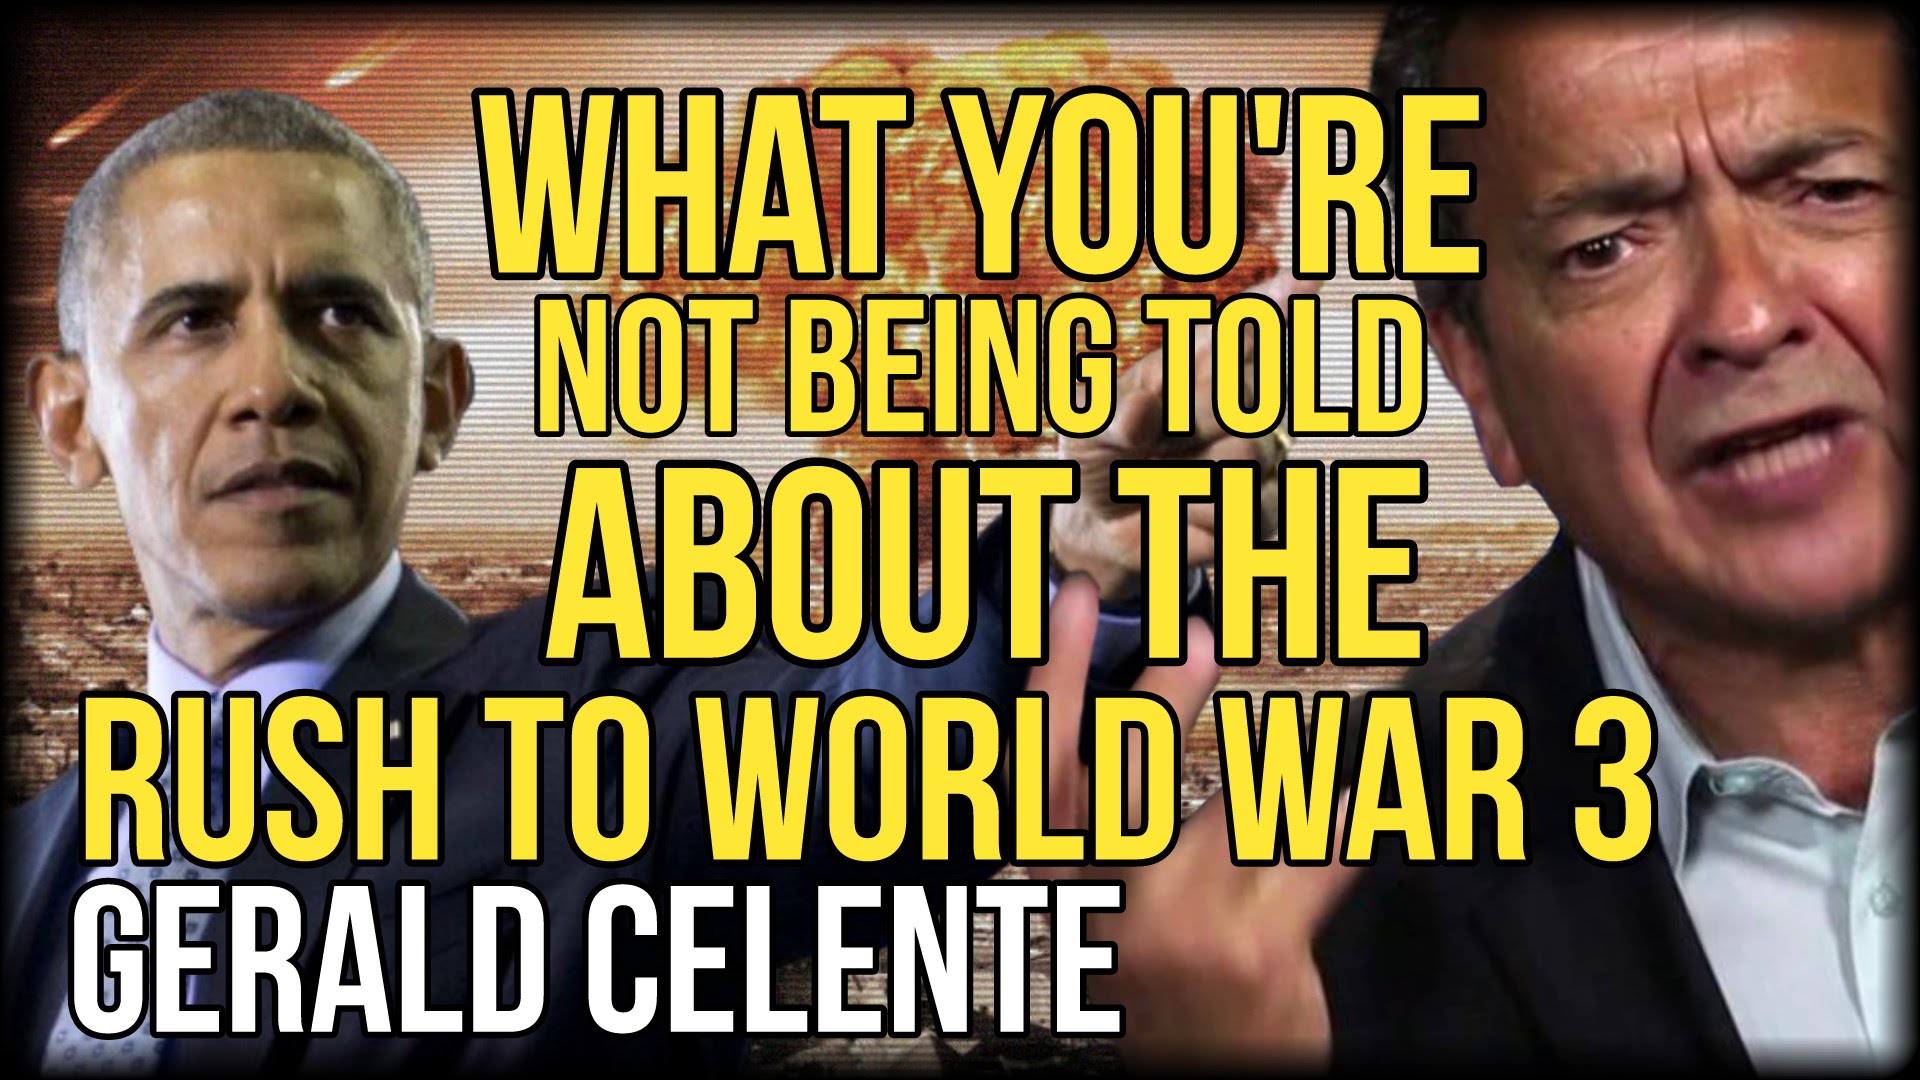 GERALD CELENTE REVEALS WHAT YOU’RE NOT BEING TOLD ABOUT THE RUSH TO WORLD WAR 3